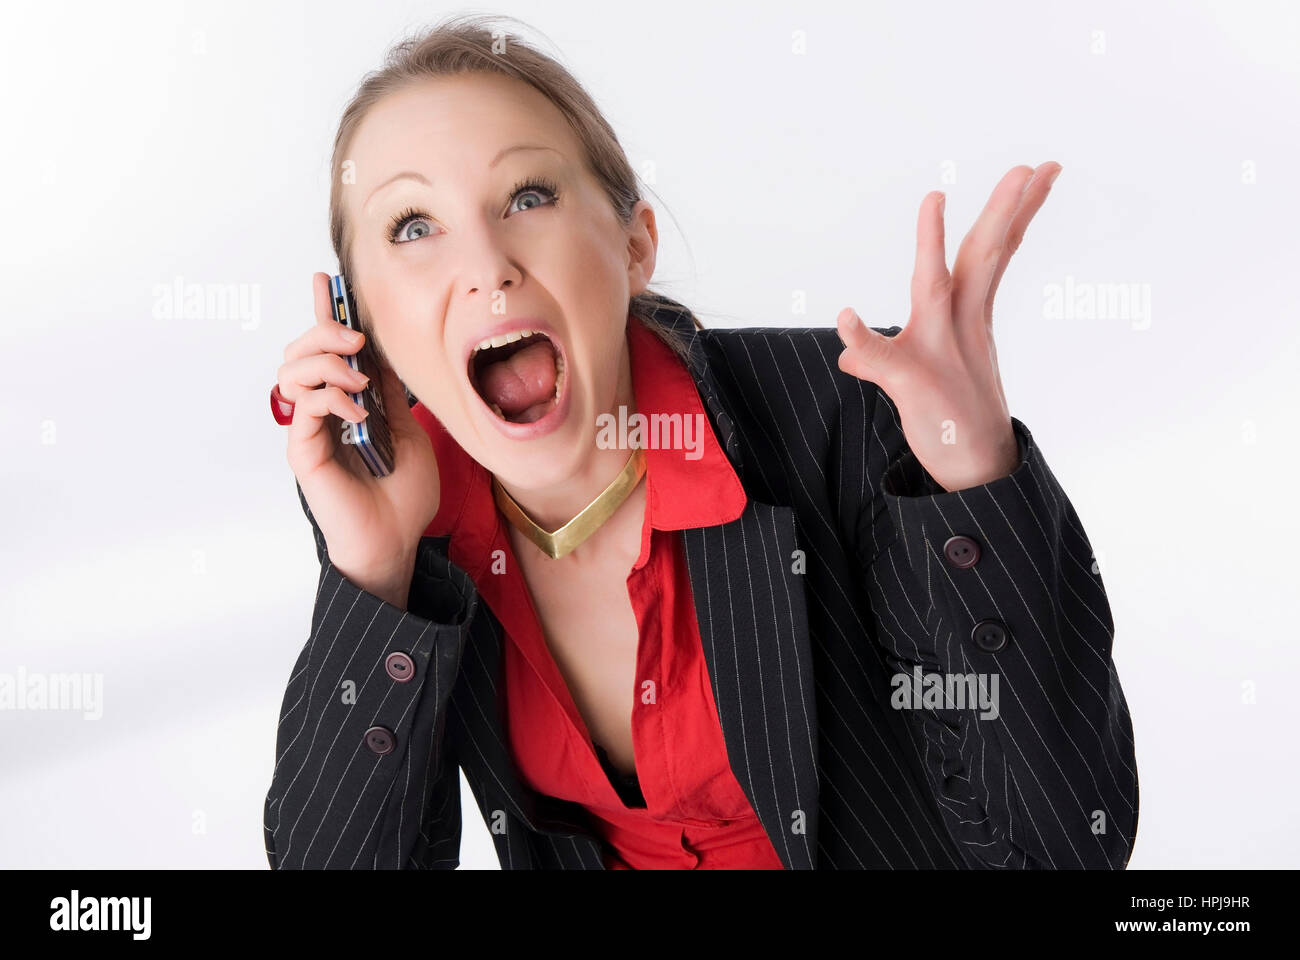 Model released , Schreiende Geschaeftsfrau mit Handy - Screaming business woman with mobile phone Stock Photo